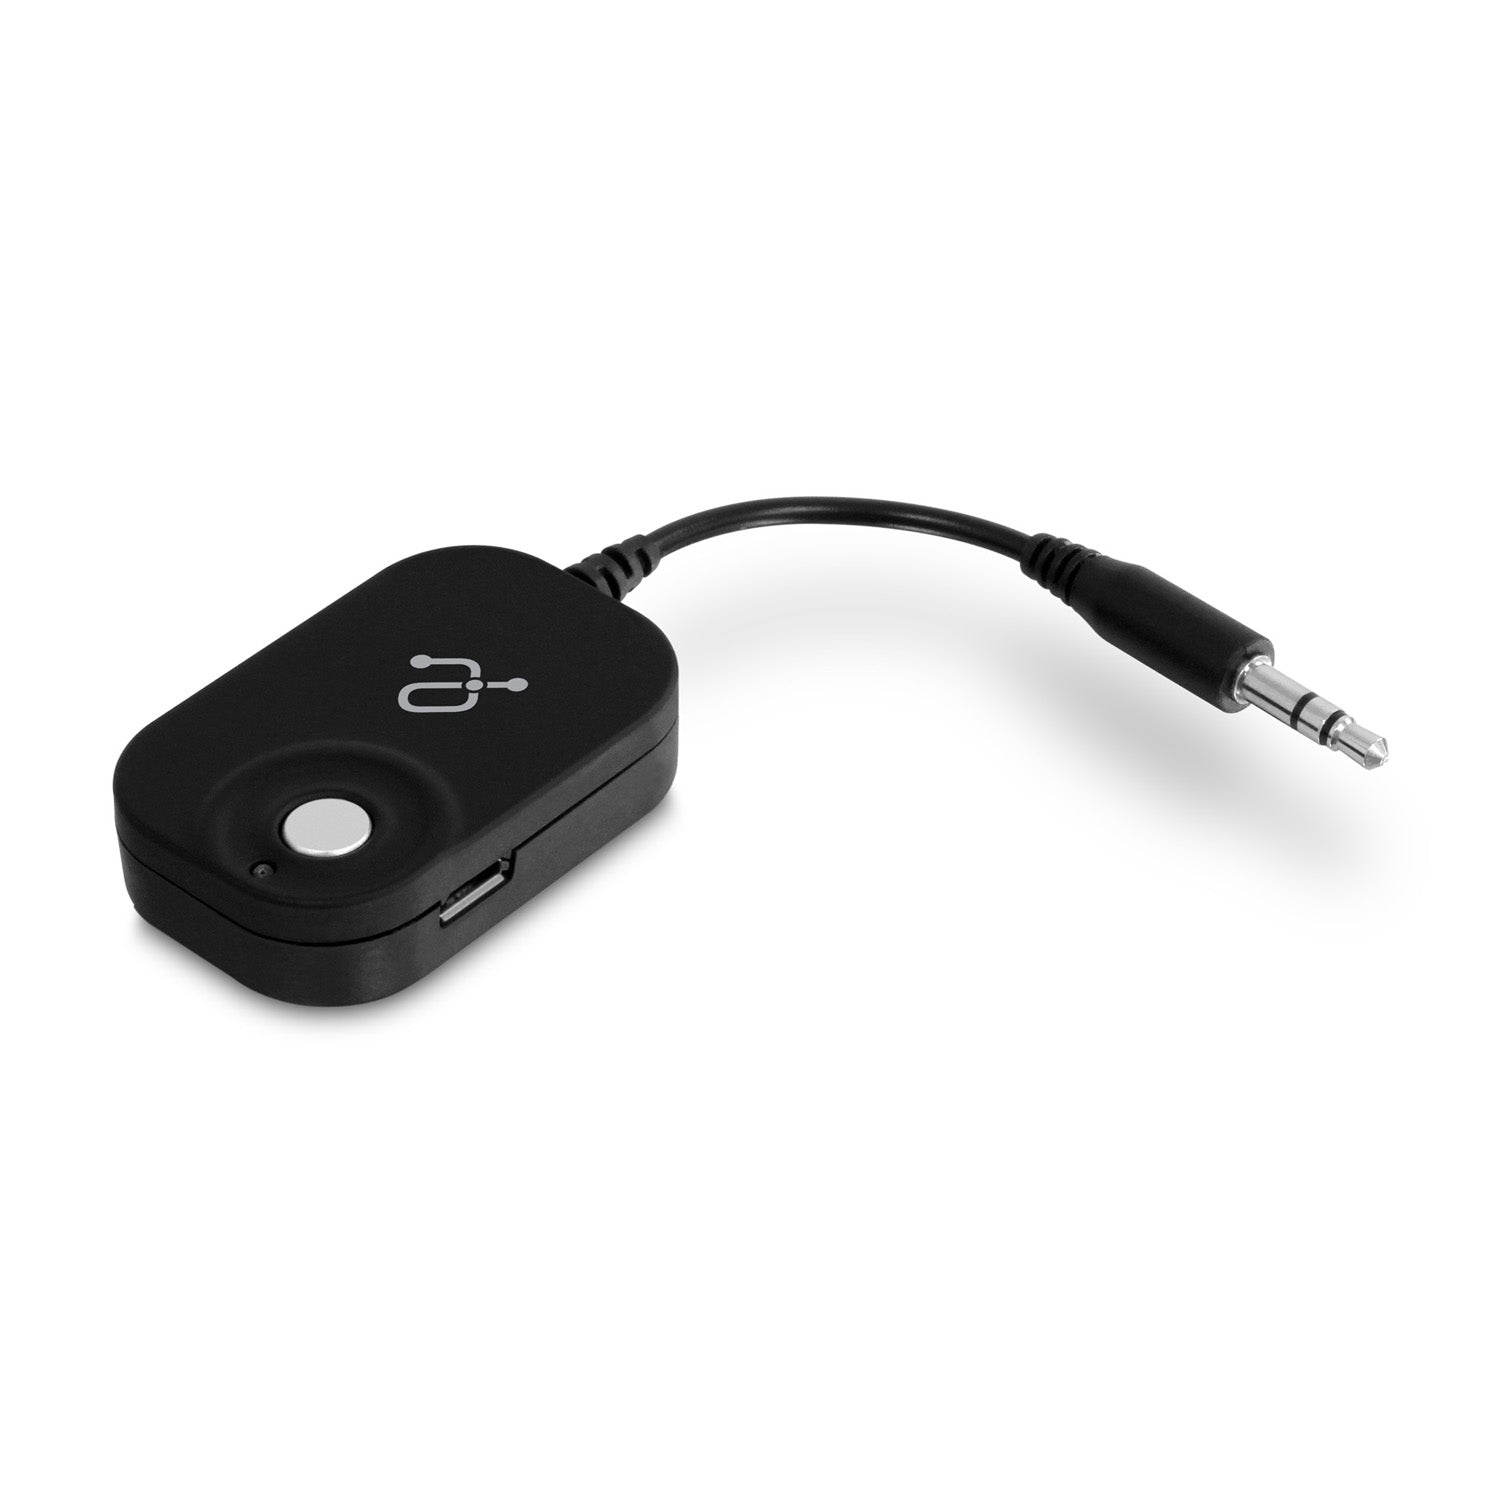 Bluetooth Cassette Adapter For Car, Universal Wireless Bluetooth 5.0 Cassette  Tape Adapter With Built In Mic For Hands Free Calling And Music Streaming  From Skywhite, $7.95